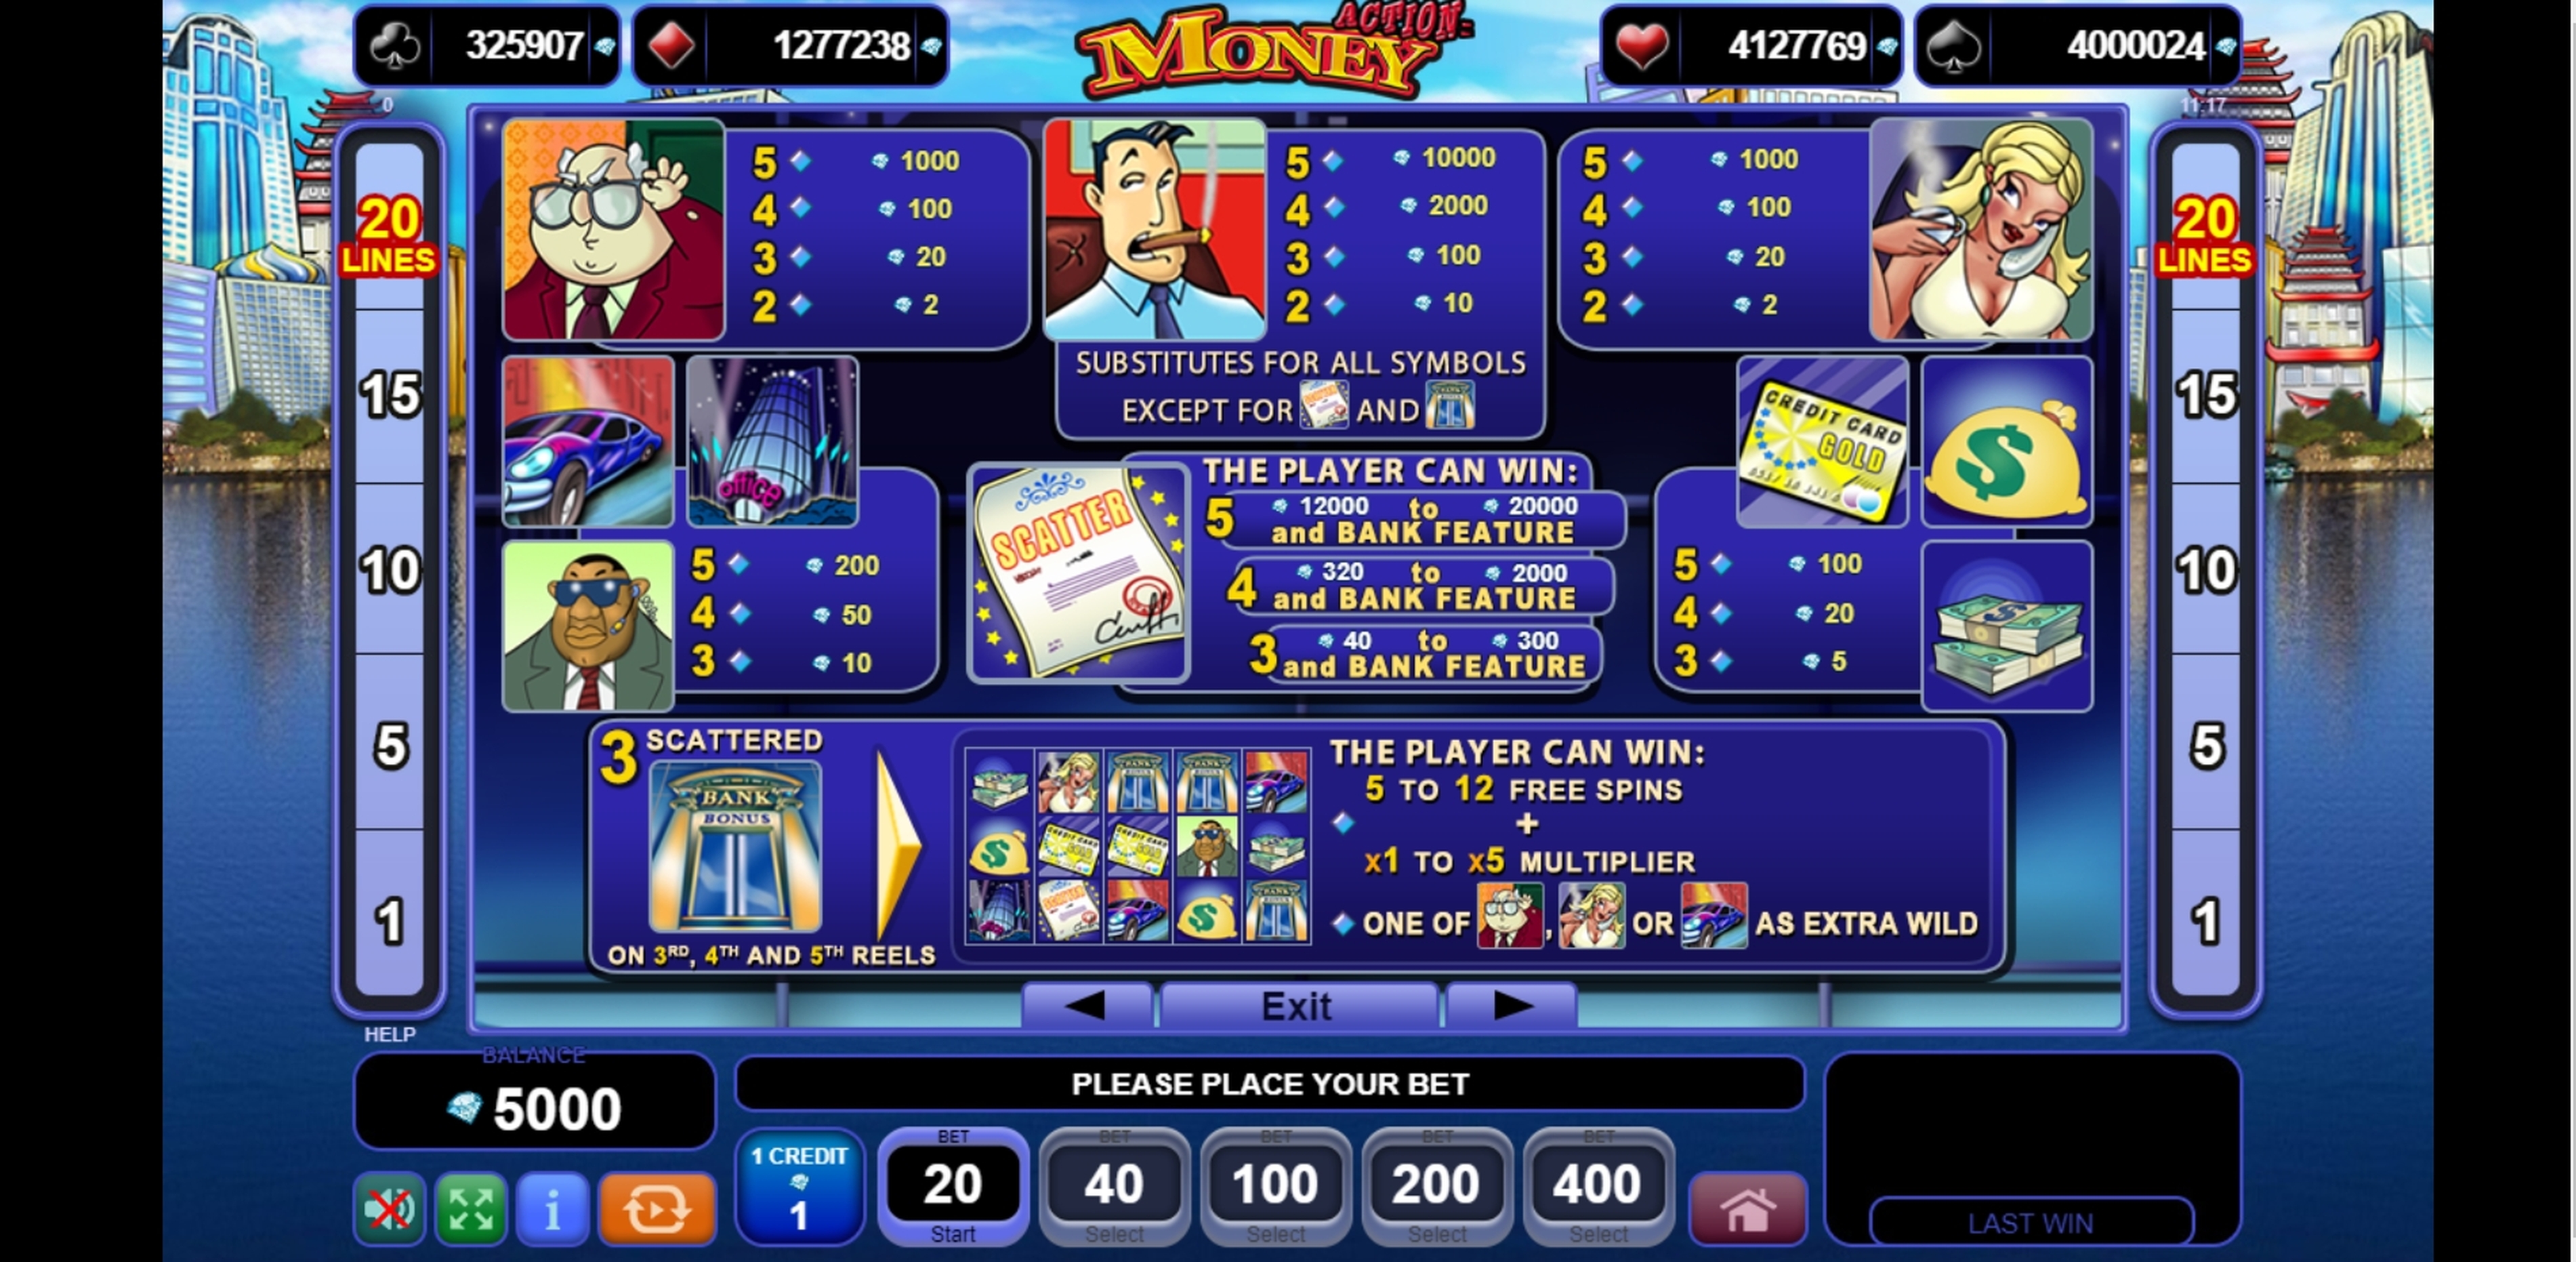 Info of Action Money Slot Game by EGT